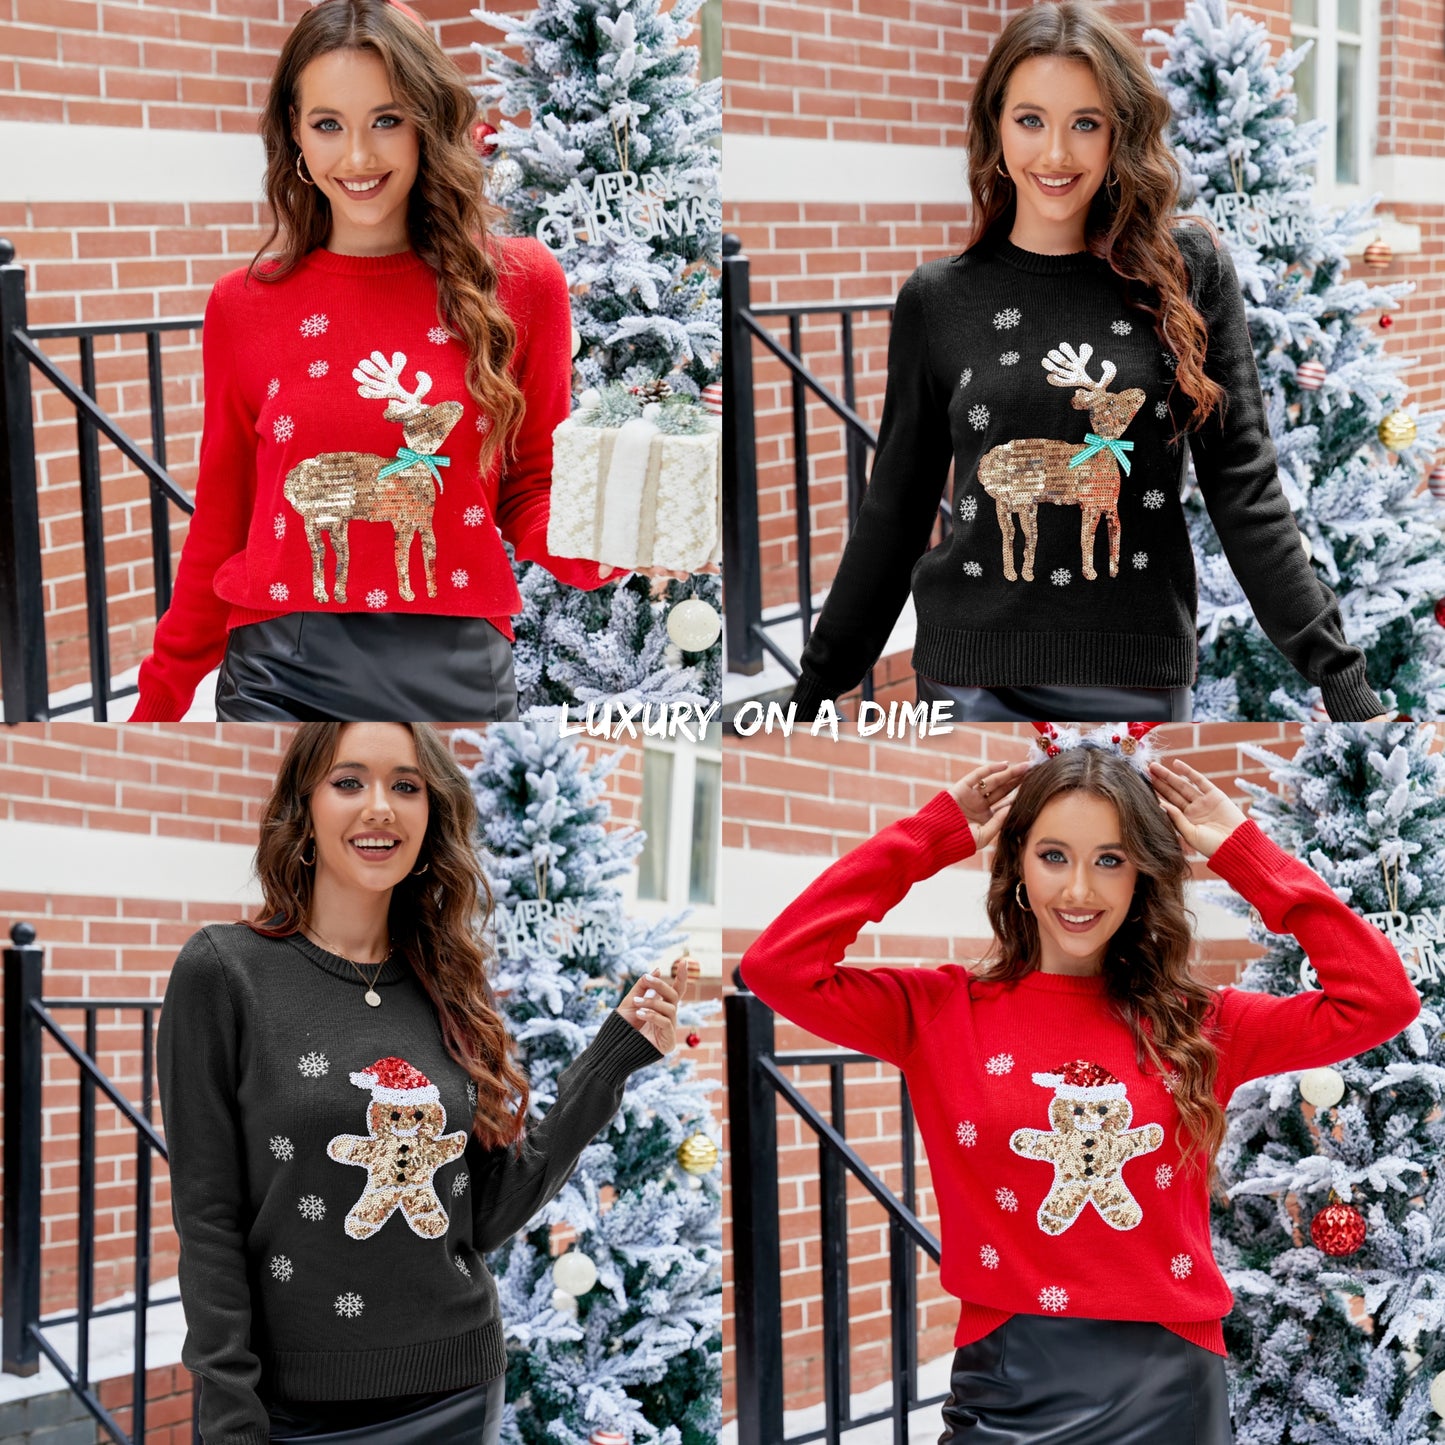 Sequin Reindeer Gingerbread Knit Round Neck Classy Holiday Sweater Top